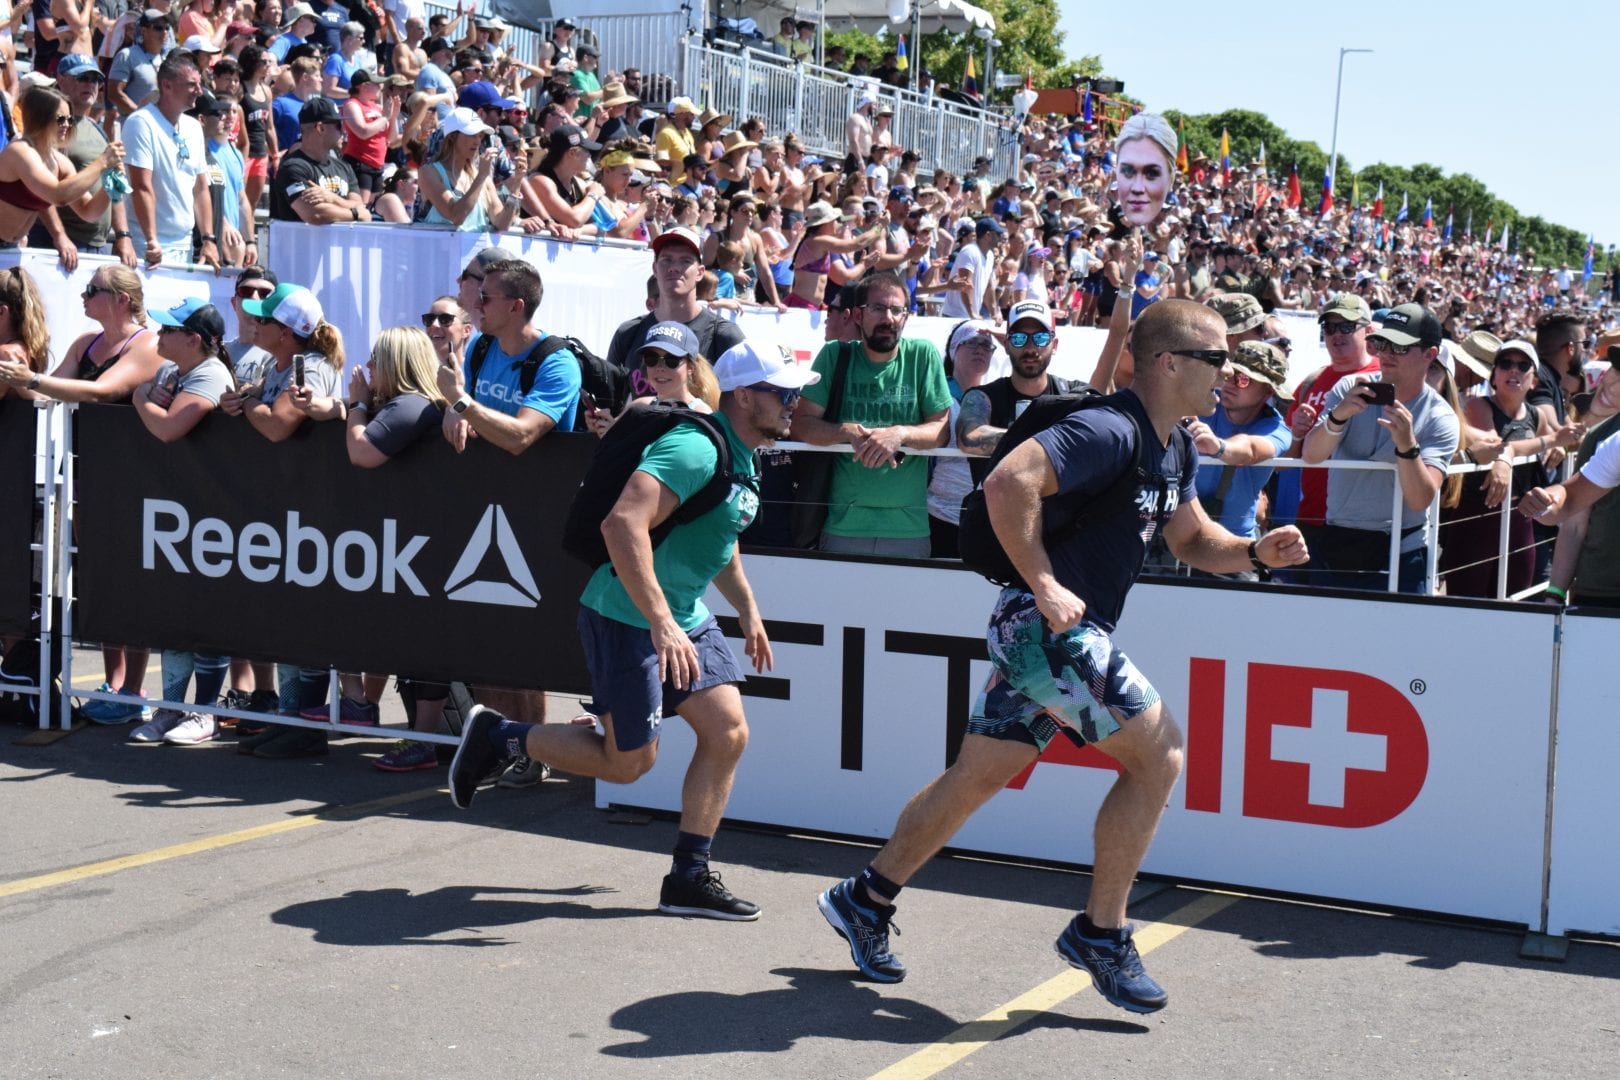 Scott Panchik and other athletes complete the Ruck Run event at the 2019 CrossFit Games